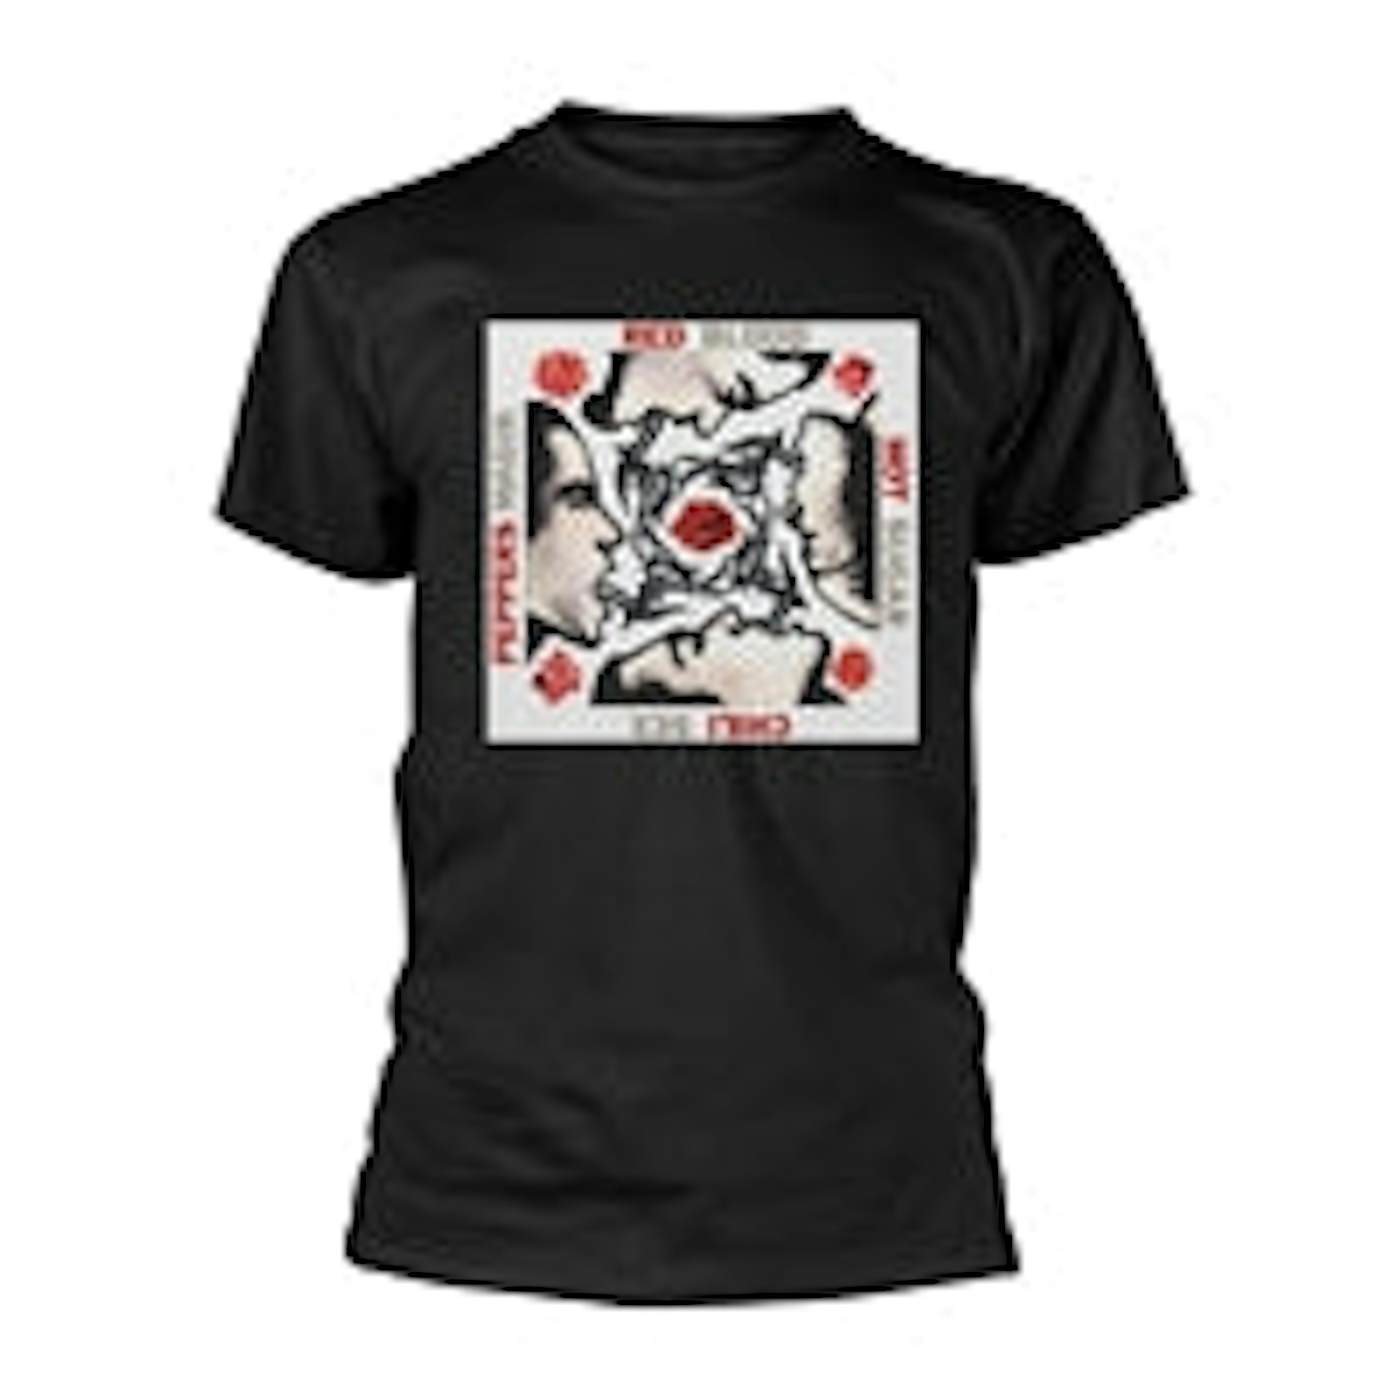 Red Hot Chili Peppers T Shirt - BSSM (Black)